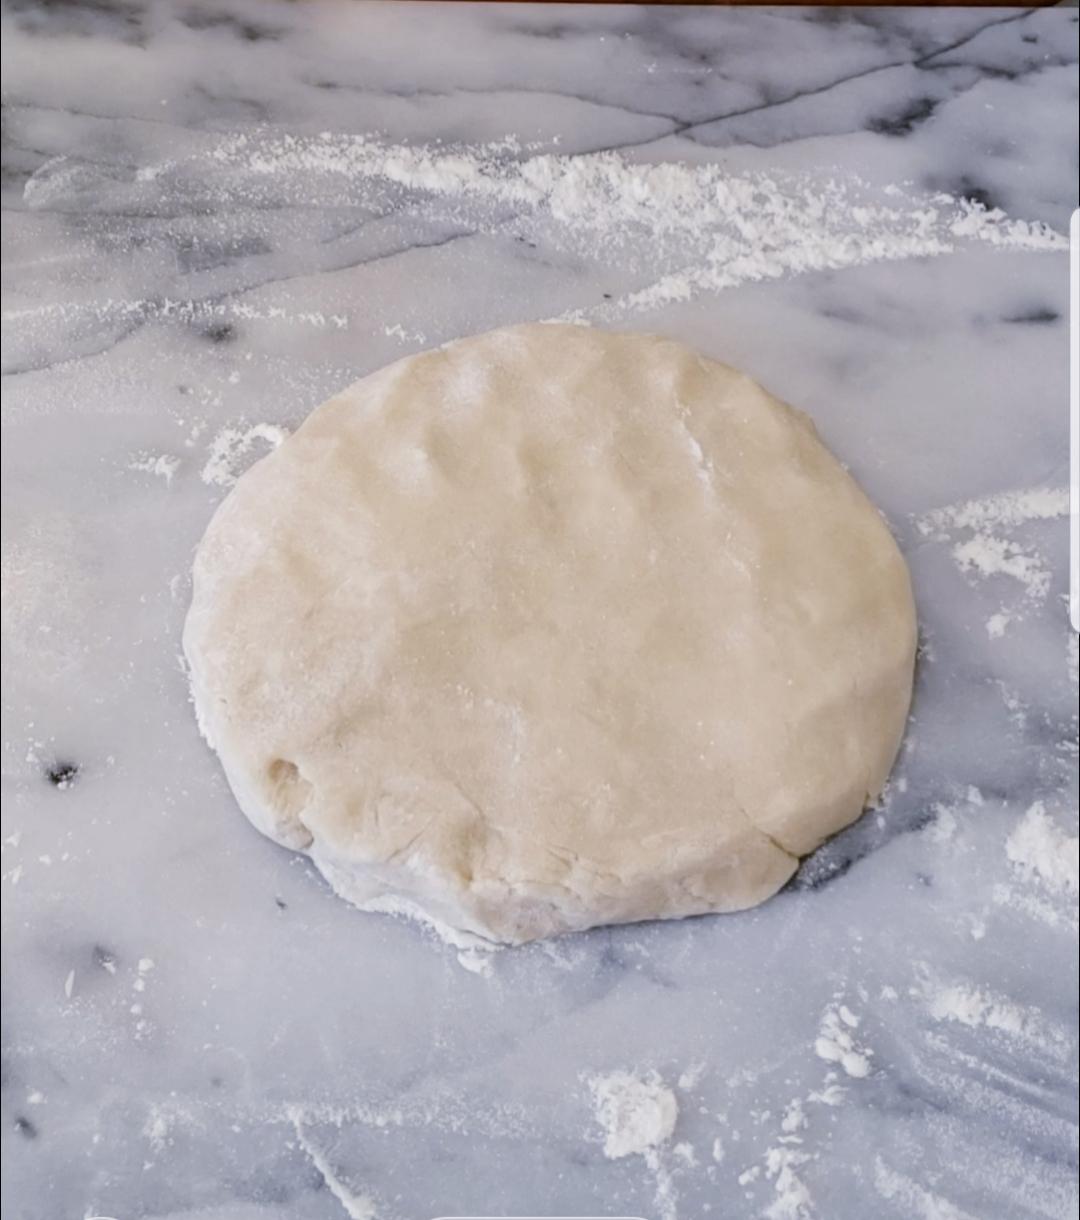 tart crust formed into a disk